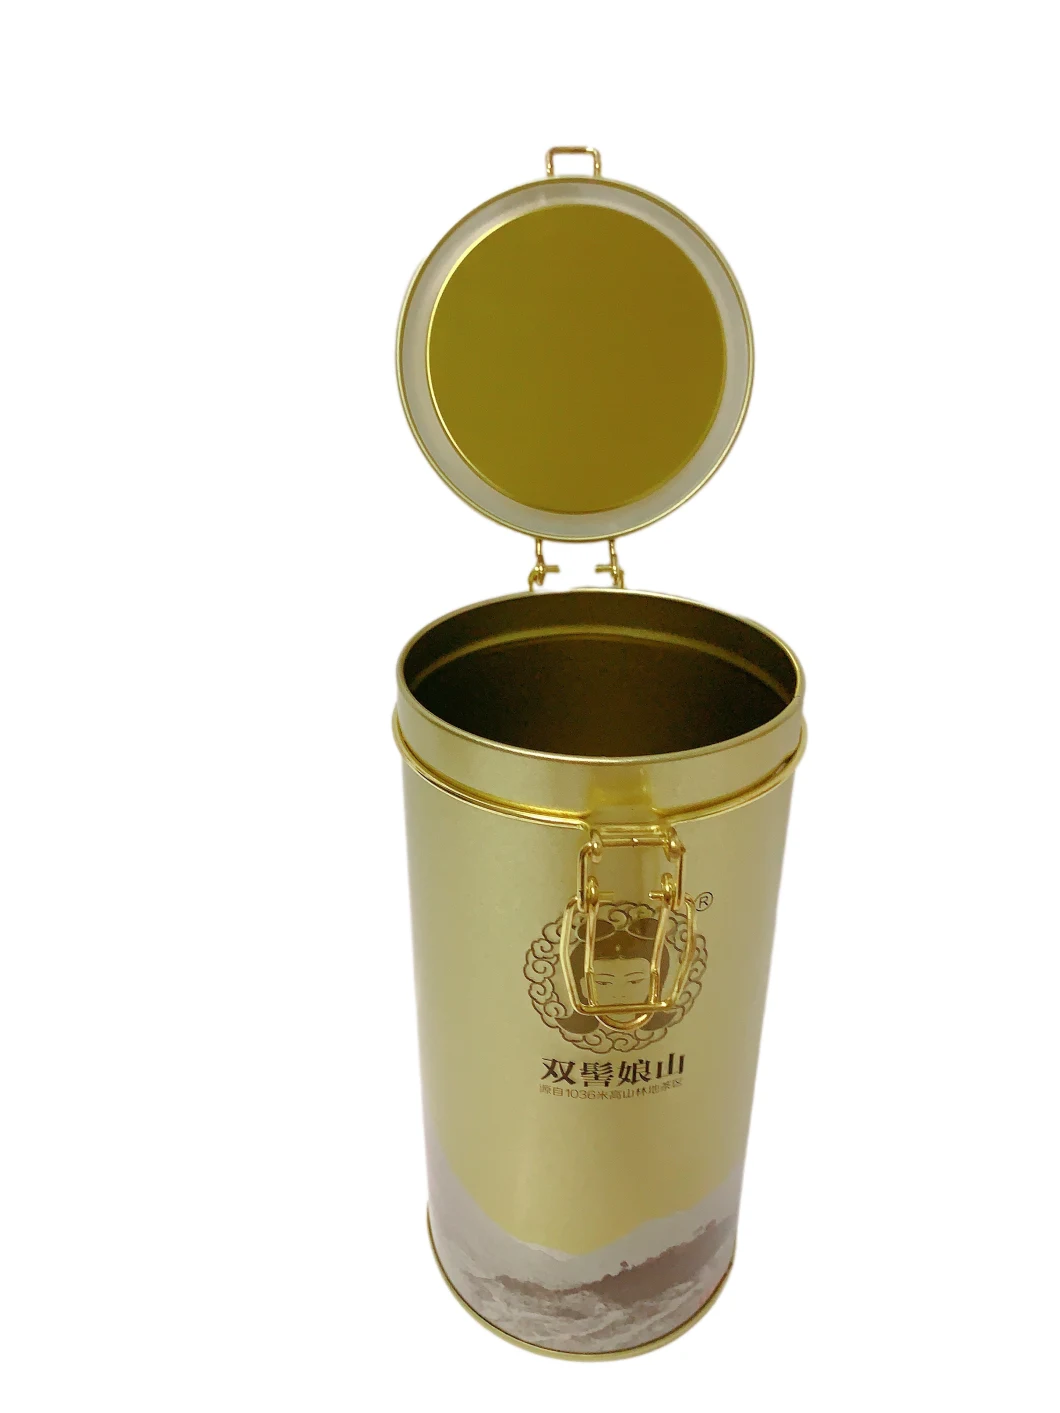 Hot Sale Round Tin Box with Airtight Lid Gift Packaging Coffee Tea Metal Tin Can Packaging Tin Box